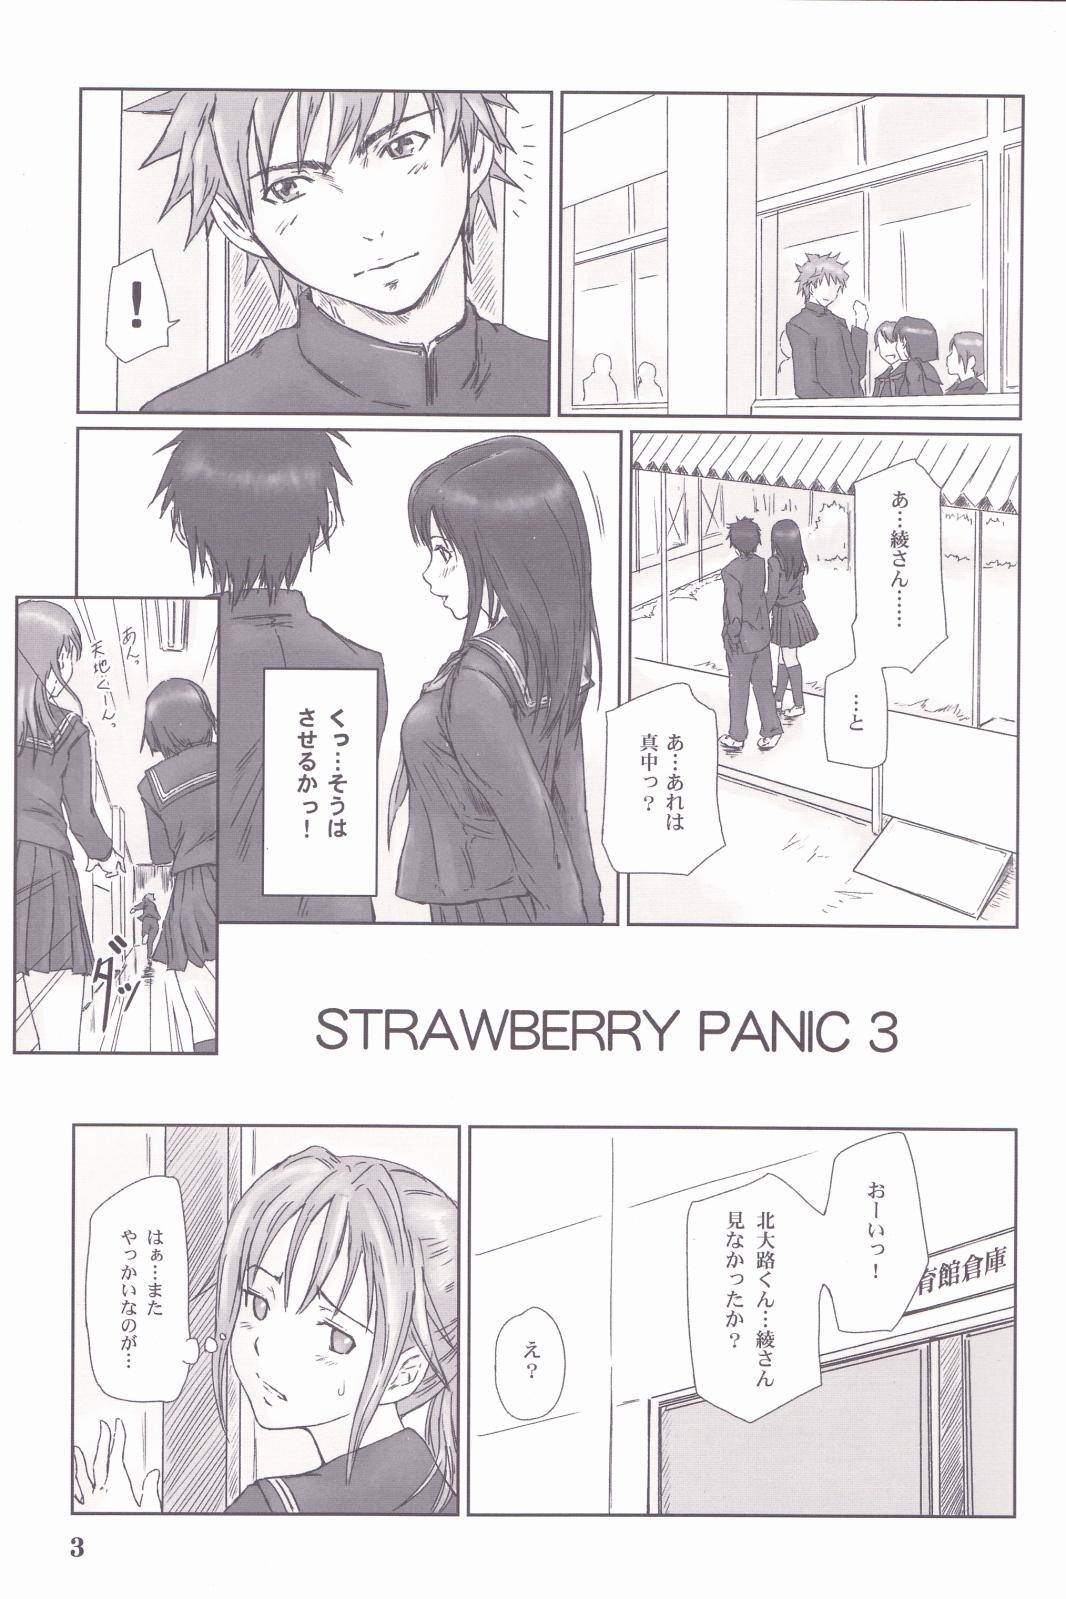 18 Year Old STRAWBERRY PANIC 3 - Ichigo 100 Mexican - Page 2